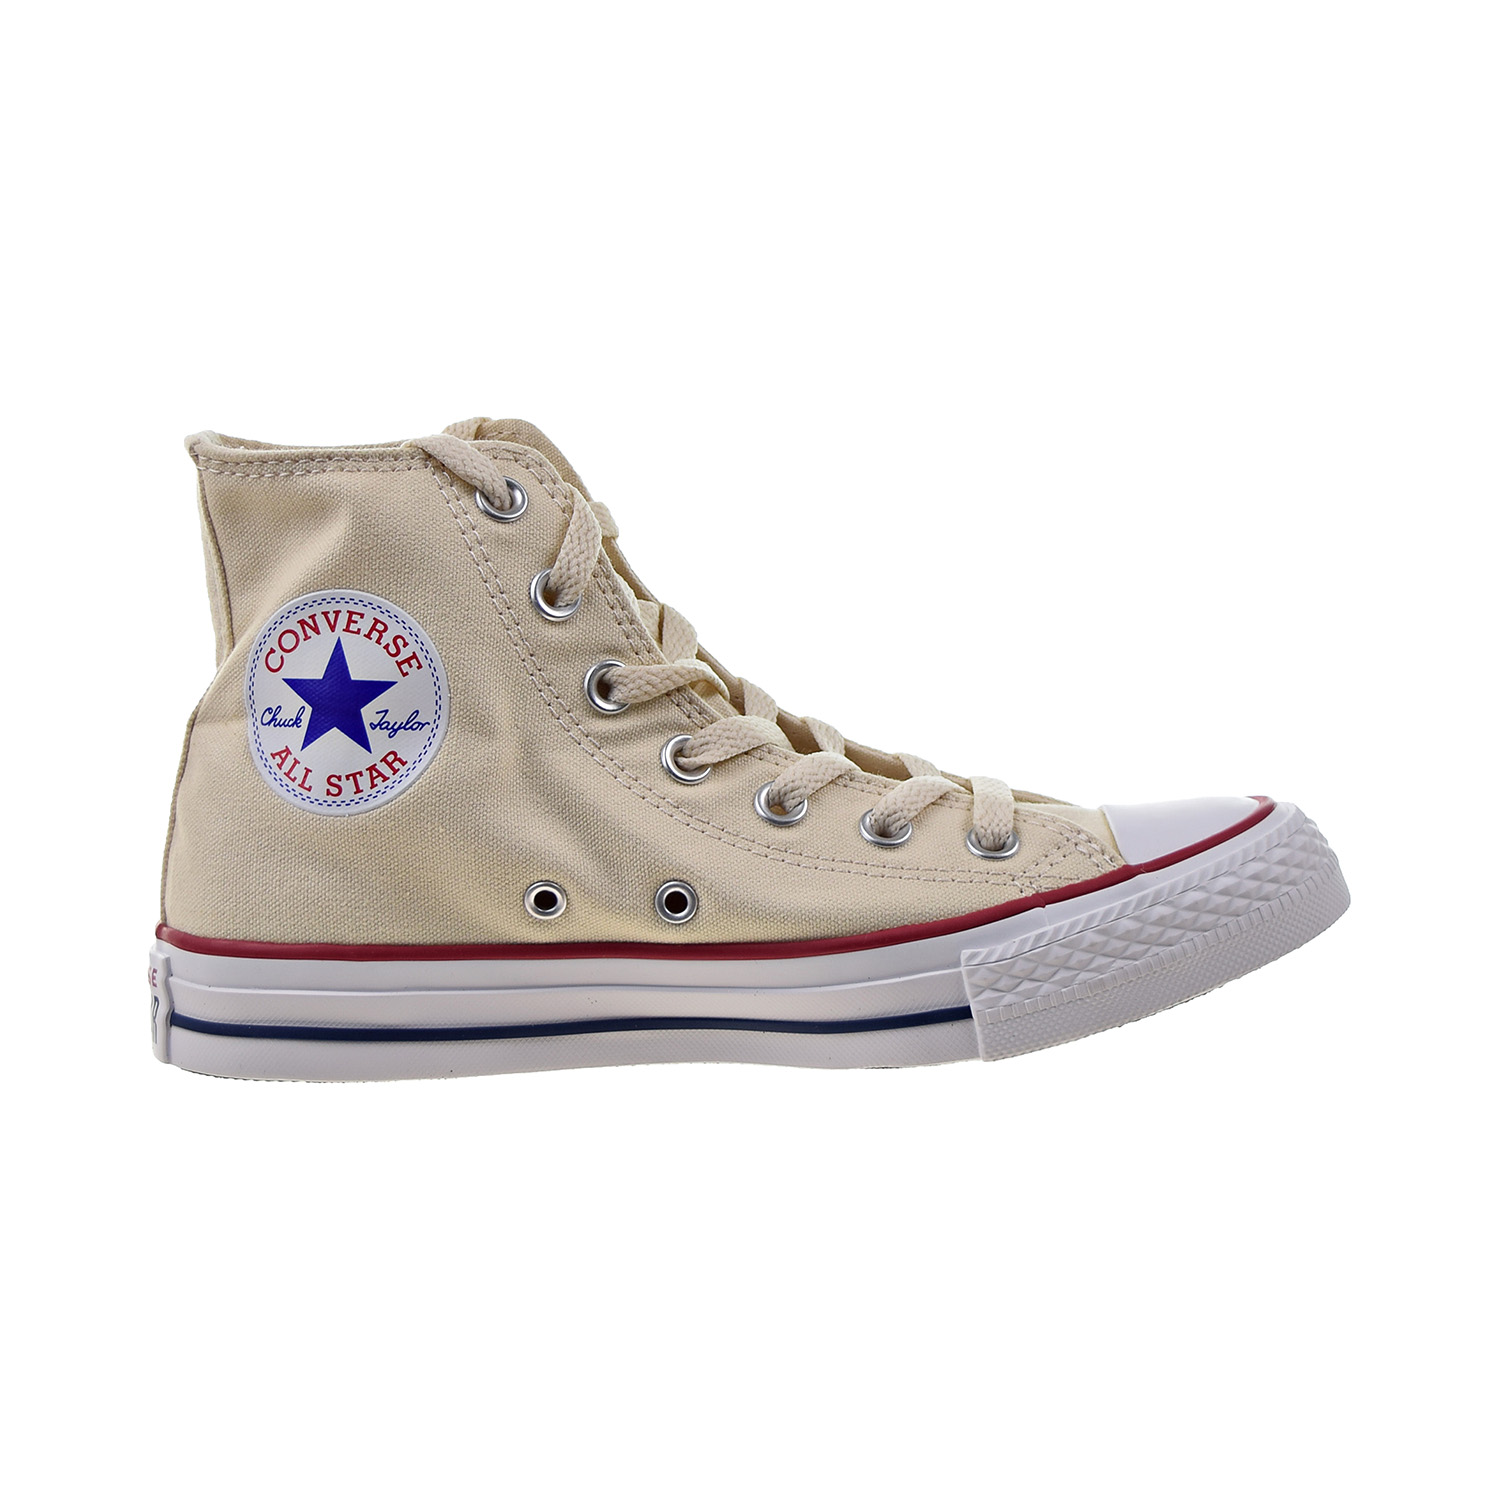 Converse Chuck Taylor All Star High Top Sneaker - image 1 of 6